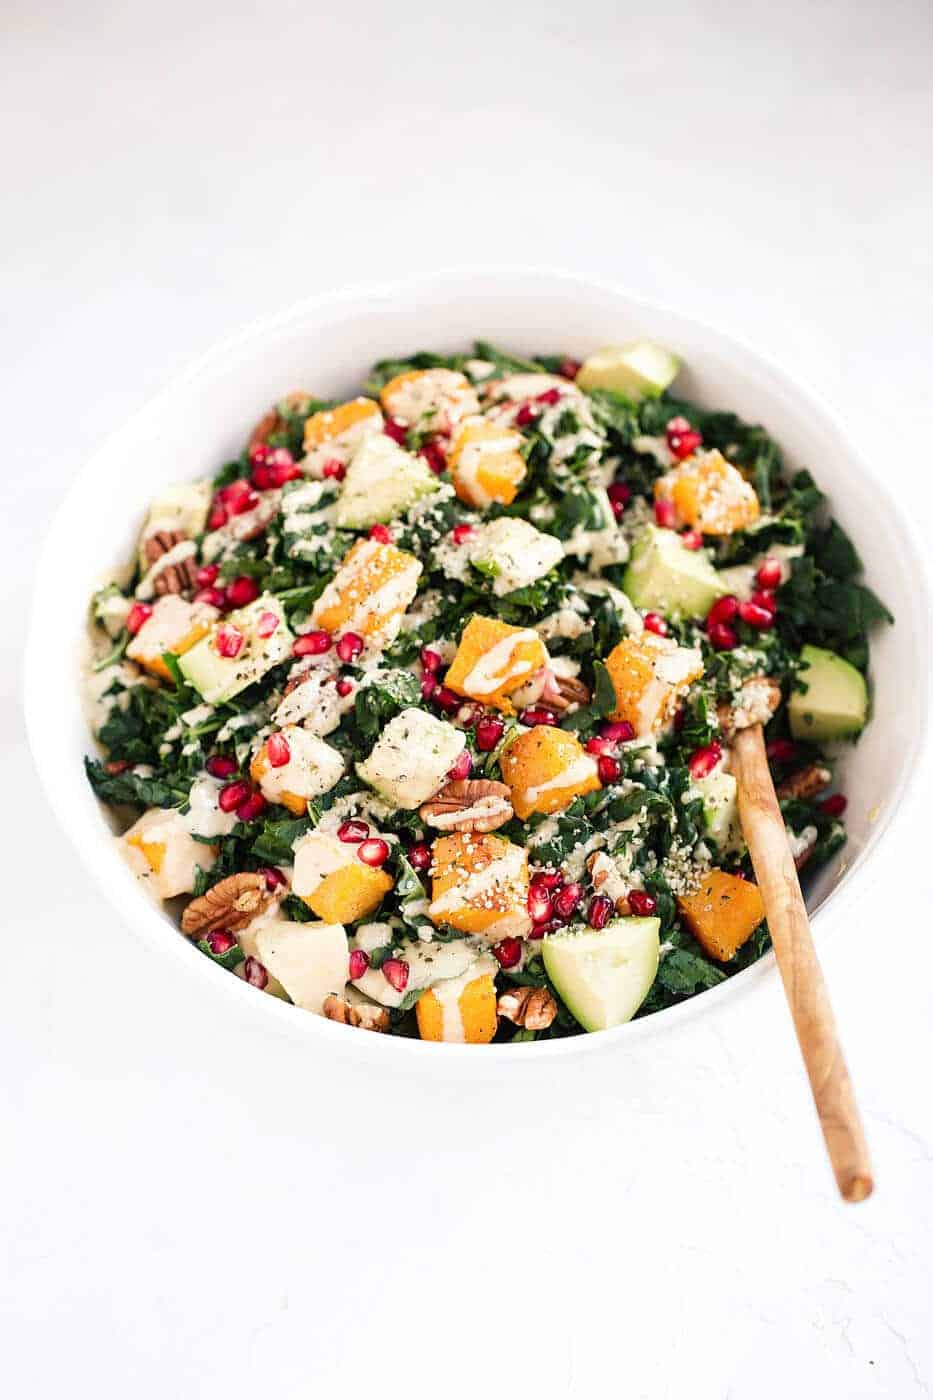 Roasted Butternut Squash Salad with Kale in a bowl with a wooden spoon